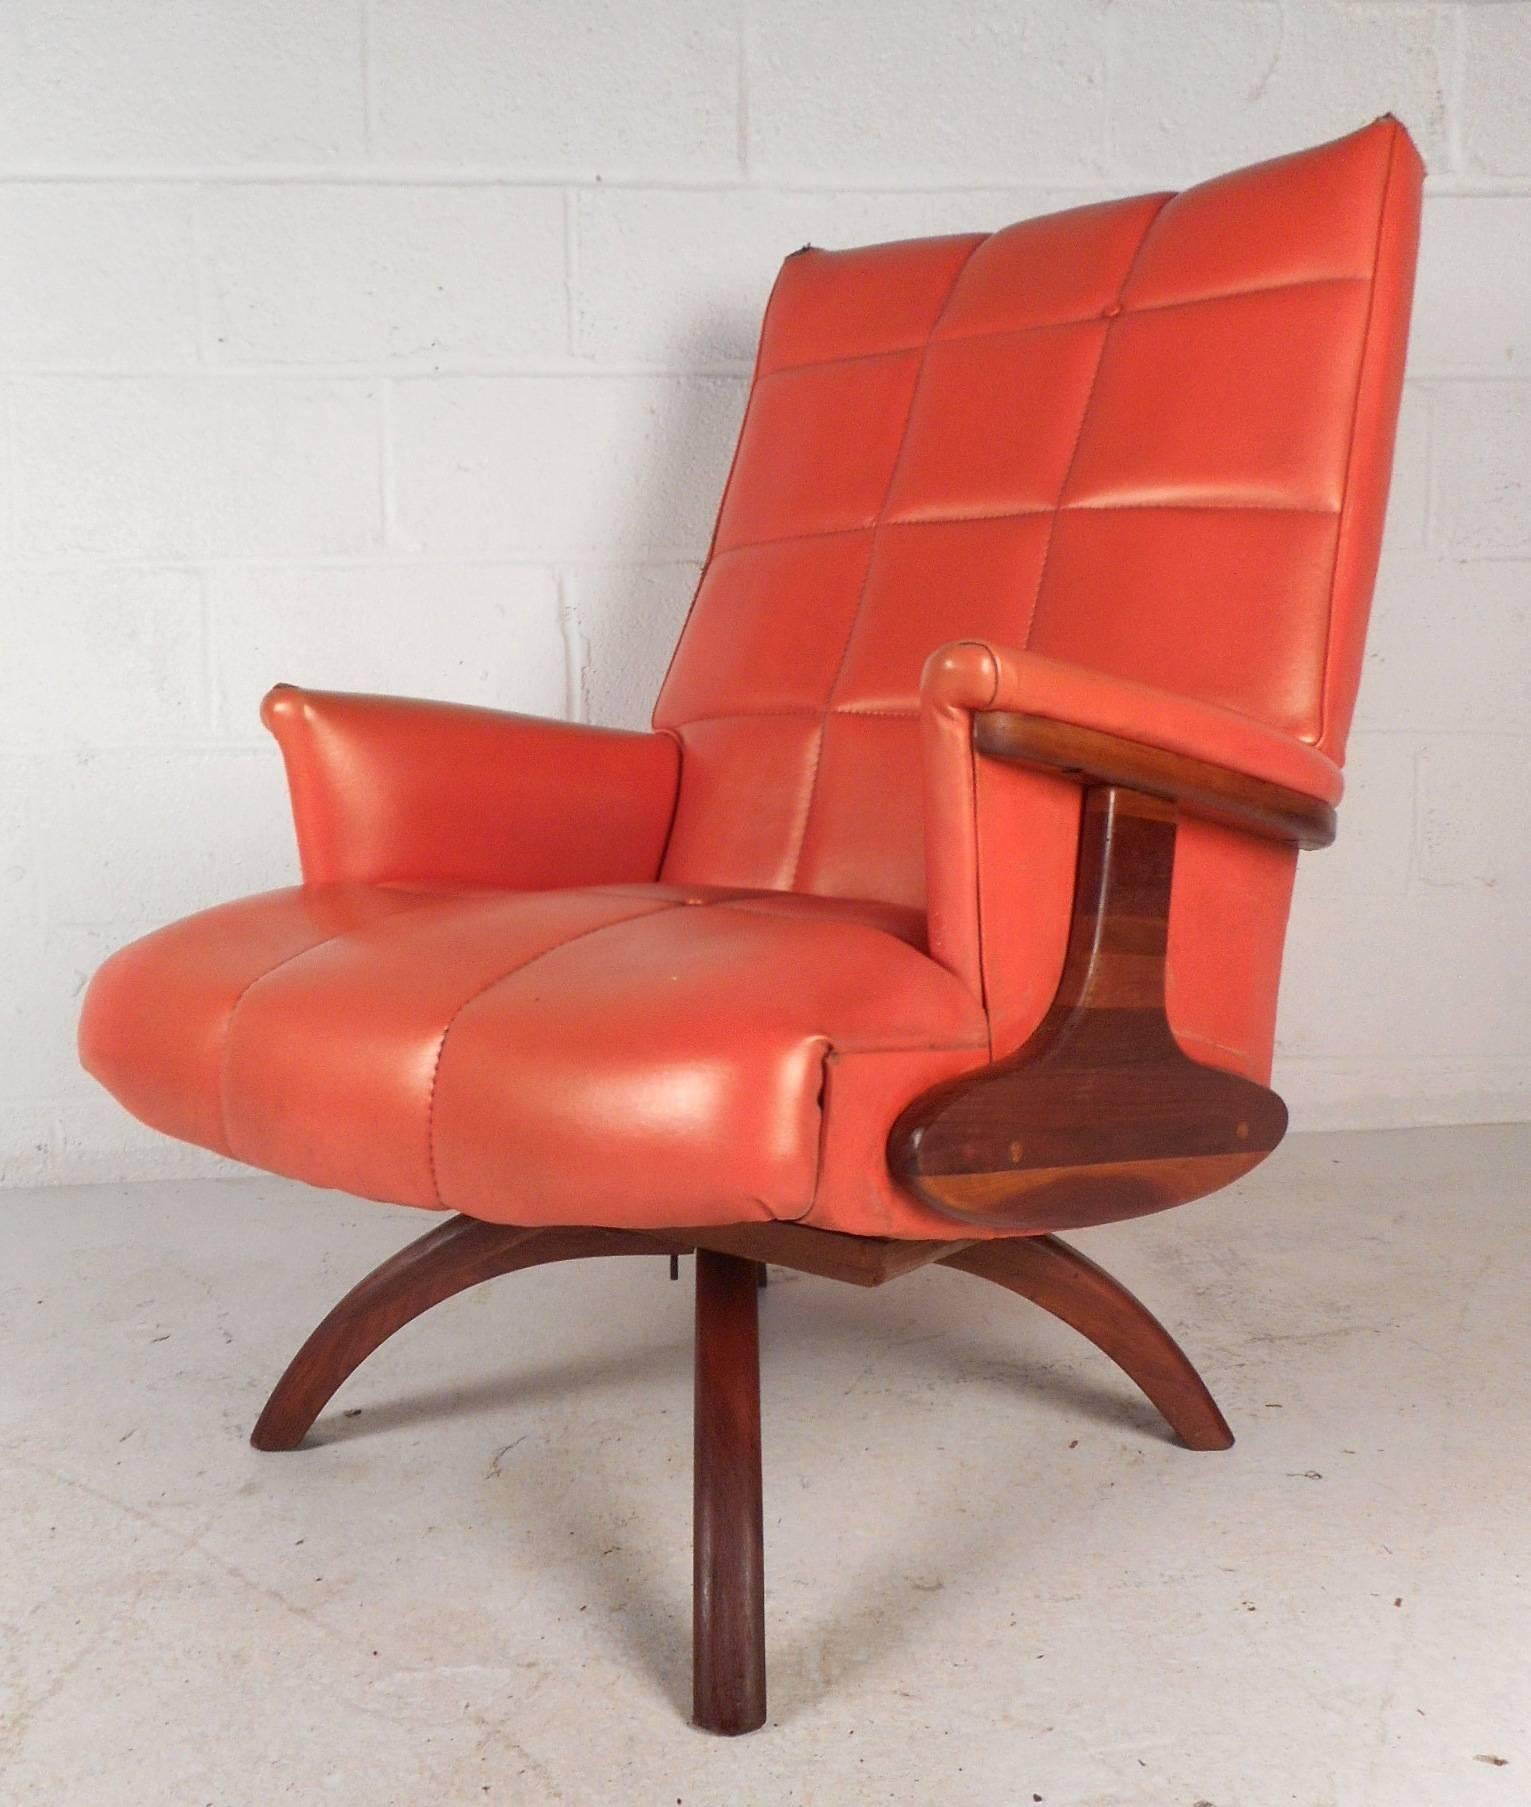 This beautiful vintage modern lounge chair and ottoman feature unique curved walnut legs. Sleek design with over stuffed seating covered in elaborate orange vinyl. Amazing sculpted sides and arm rests with gorgeous walnut wood grain add to the